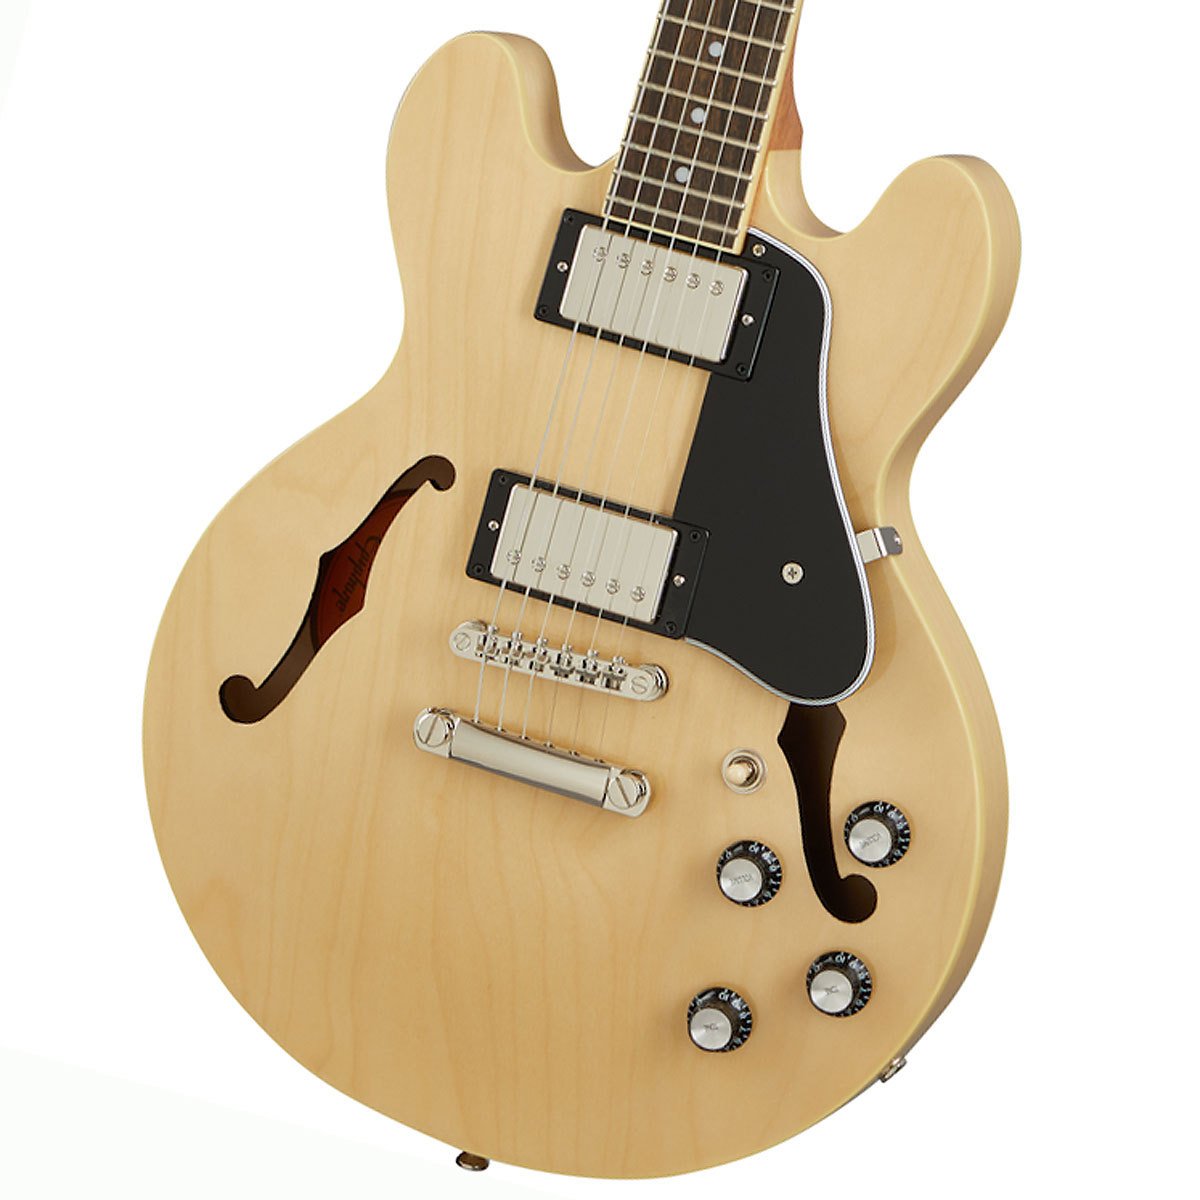 Epiphone / Inspired by Gibson ES-339 Natural エピフォン セミアコ ES339